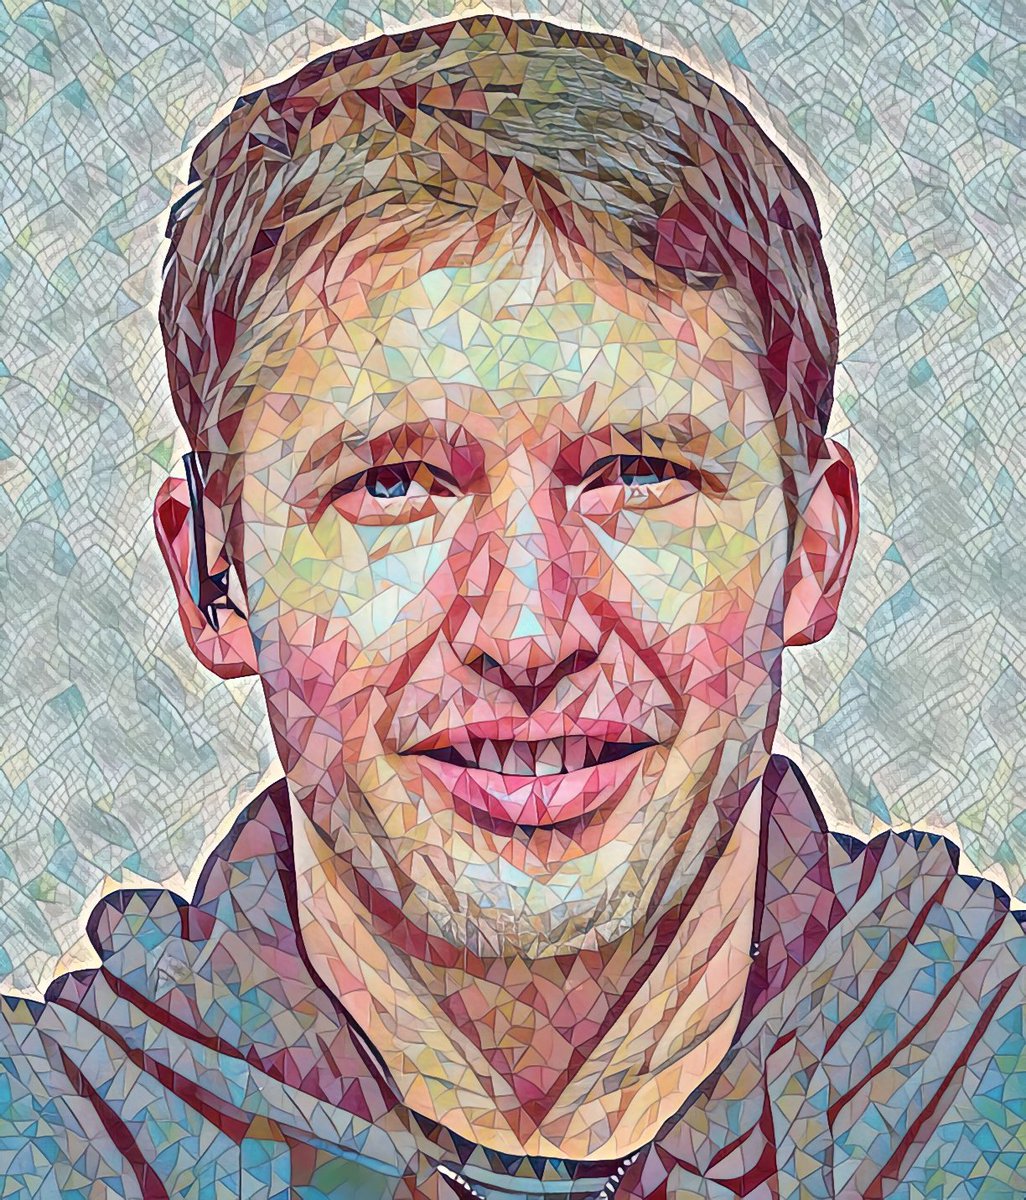 Our autistic artist in residence has 'done' @JamesBlunt and #JarvisCocker What d'ya think folks?